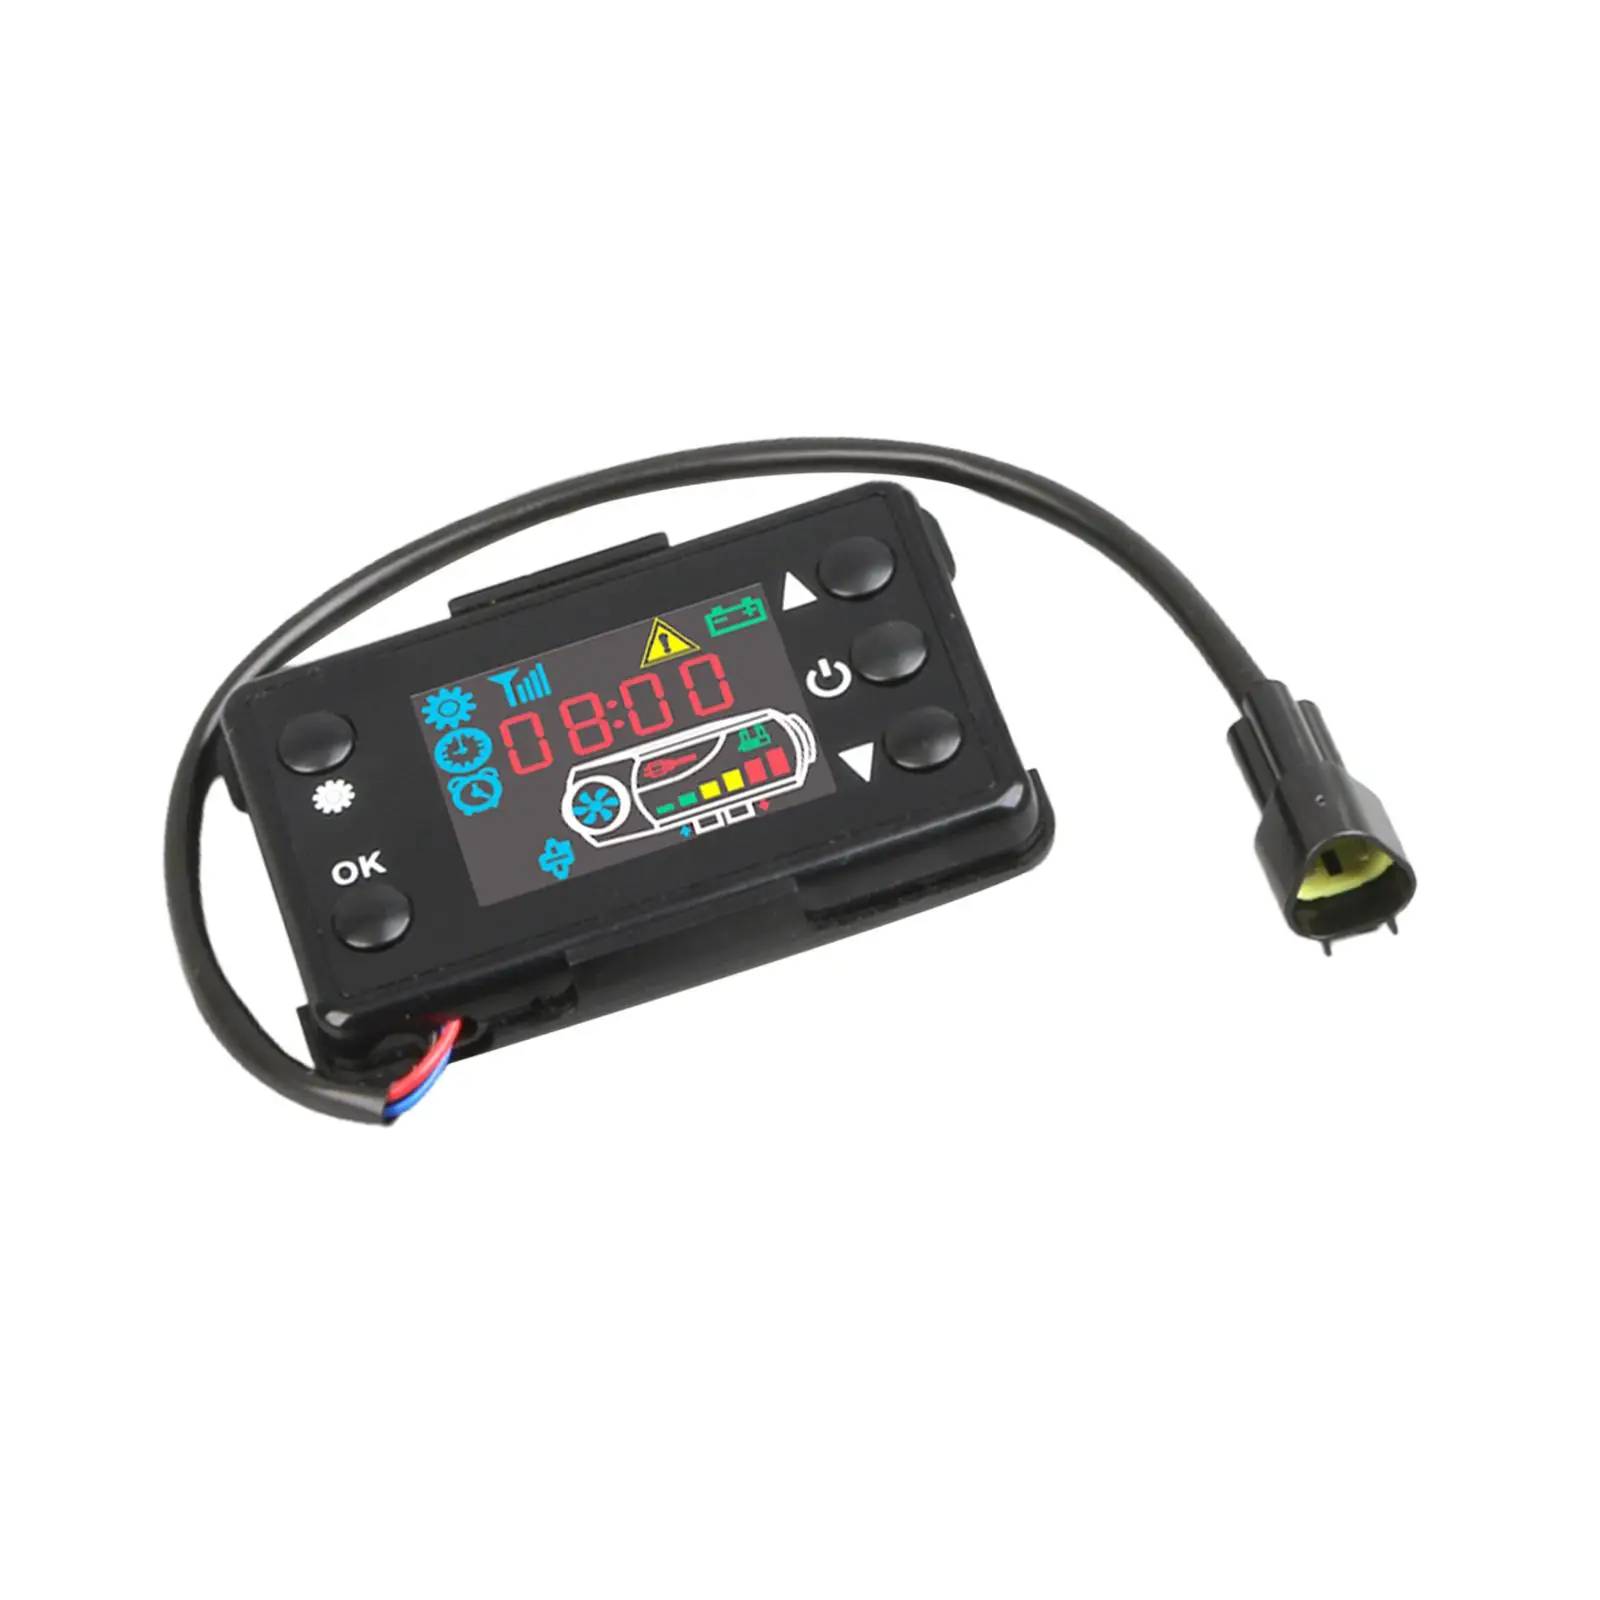 Car Heater Controller Repair Professional 3 Pin Plug Accessories Direct Replace LCD Monitor Switch for Vehicle Motorhomes